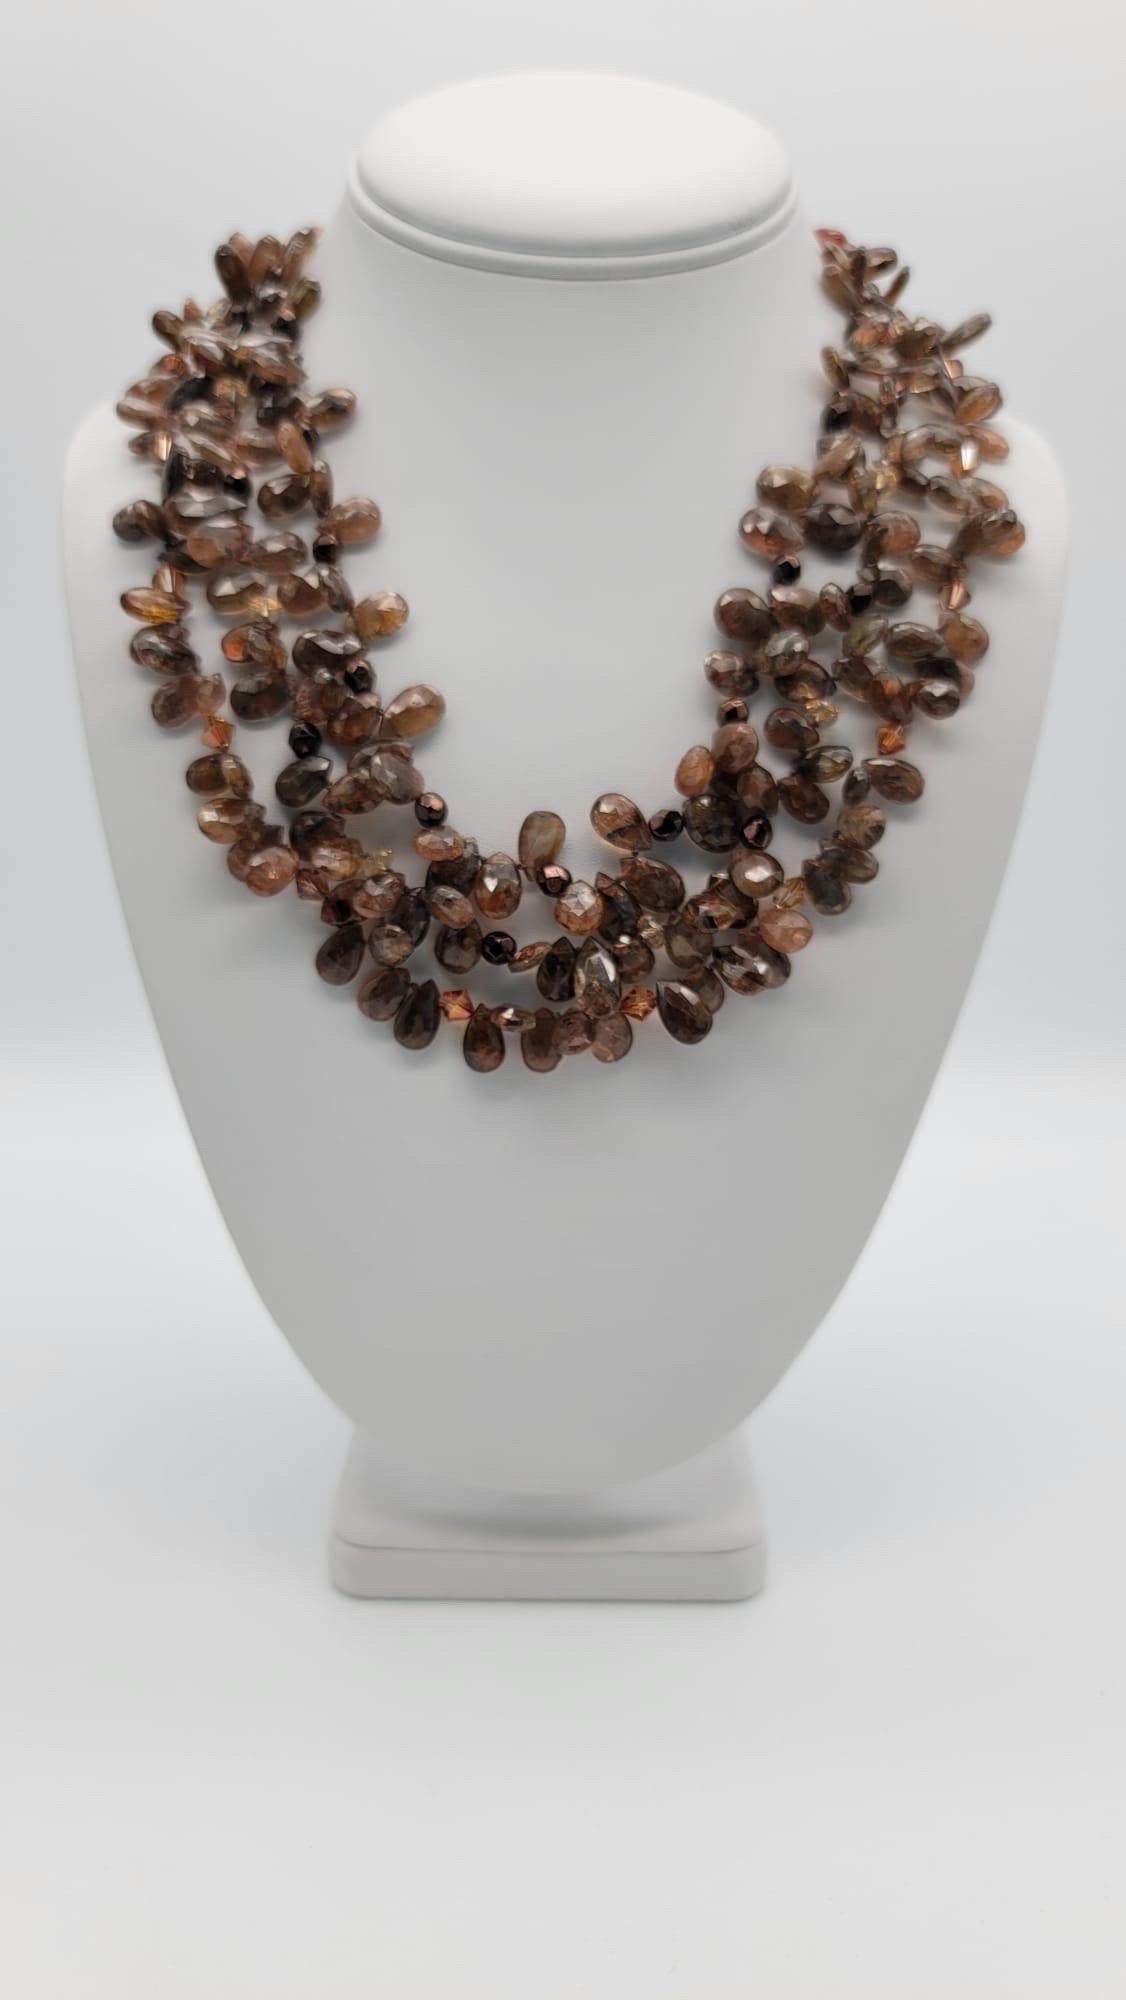 One-of-a-Kind

Stop the show with this glamorous 3-strand teardrop polished and faceted, brown Rutilated Quartz and Sunstone necklace. The clasp, which looks great on the side as well, is a beautiful piece of polished Picasso jasper set in sterling